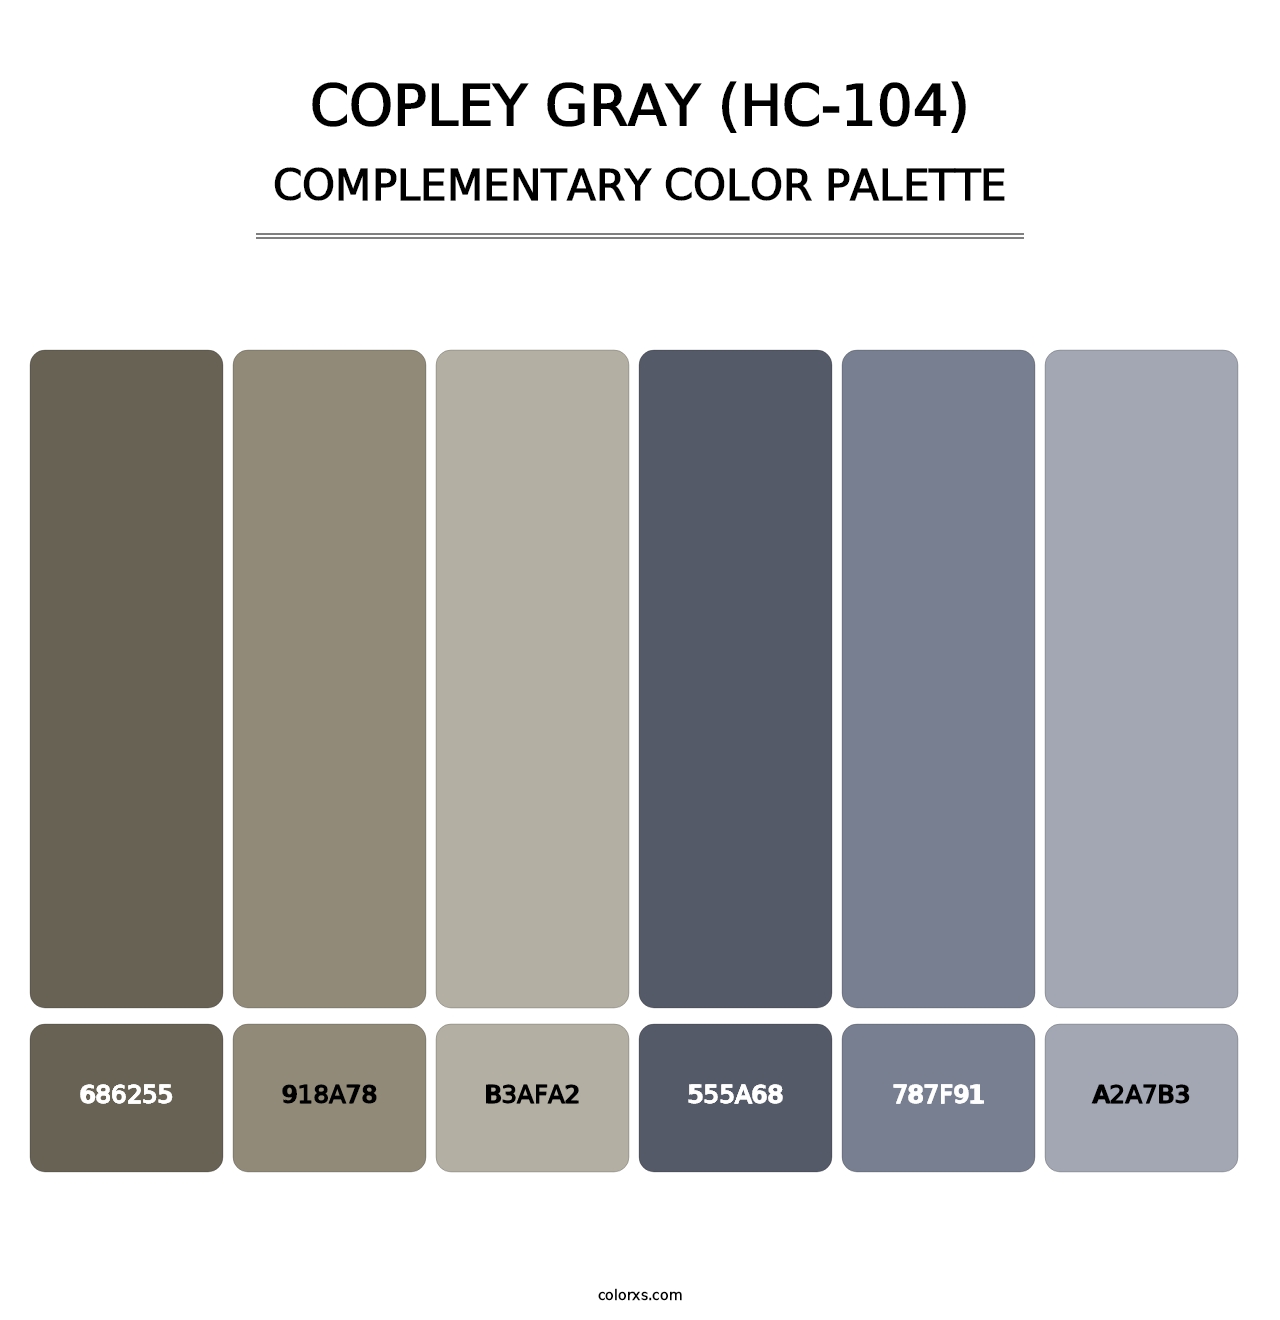 Copley Gray (HC-104) - Complementary Color Palette